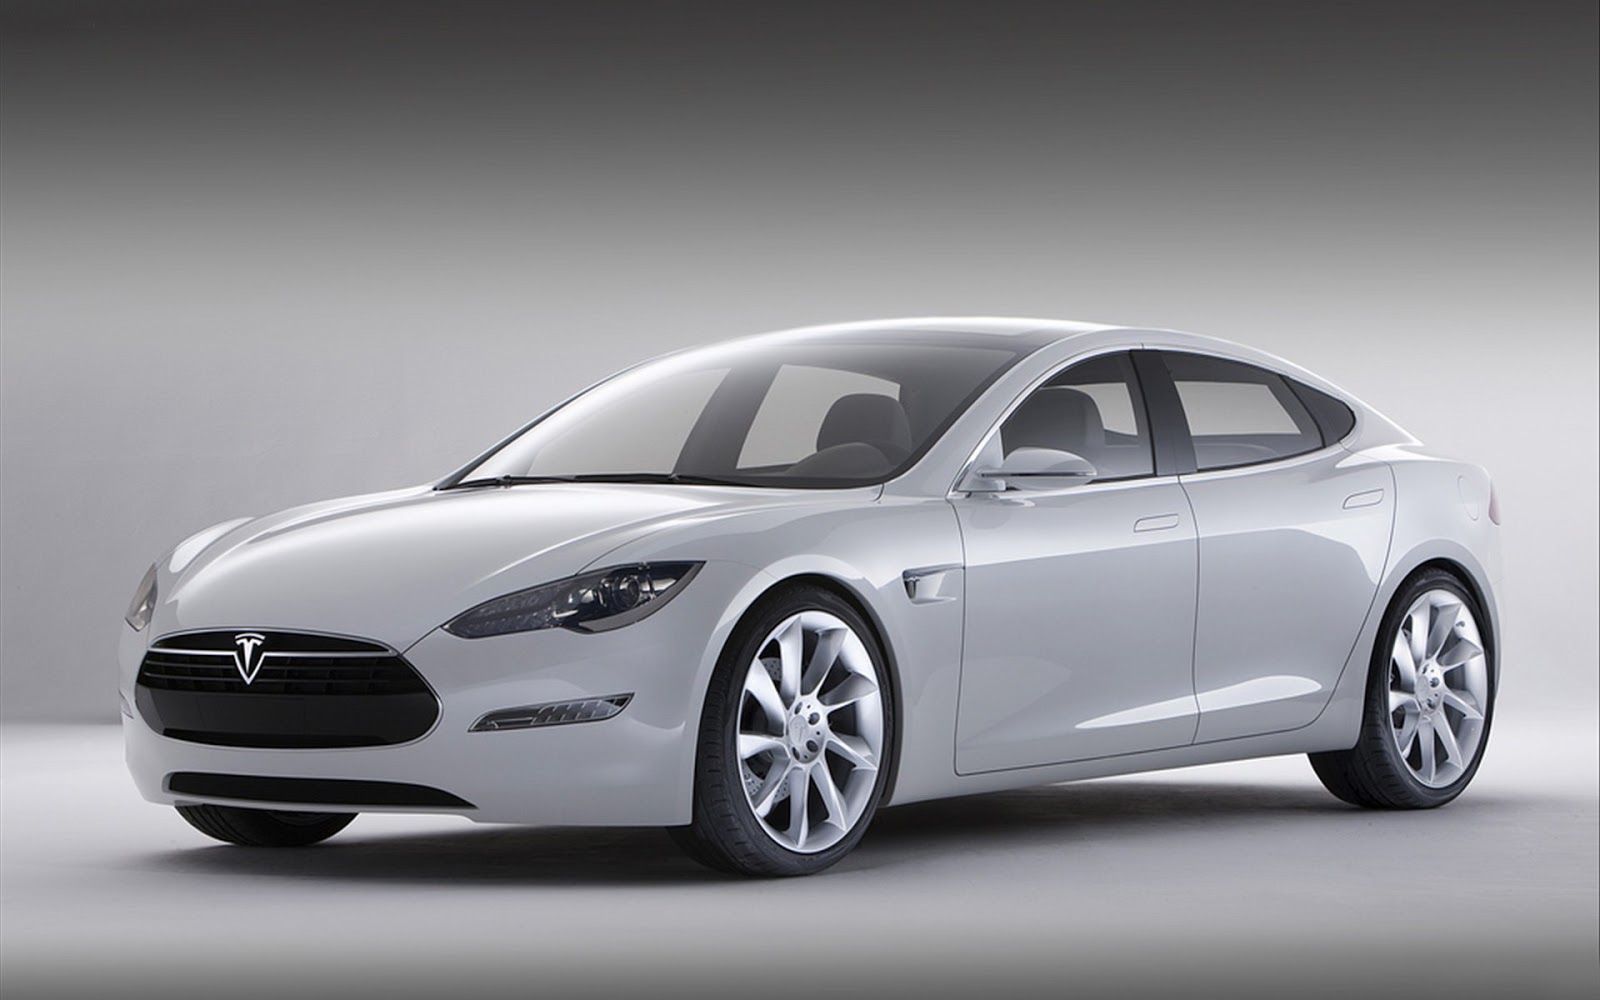 HD WALLPAPERS tesla Cars models 2013 latest wallpapers